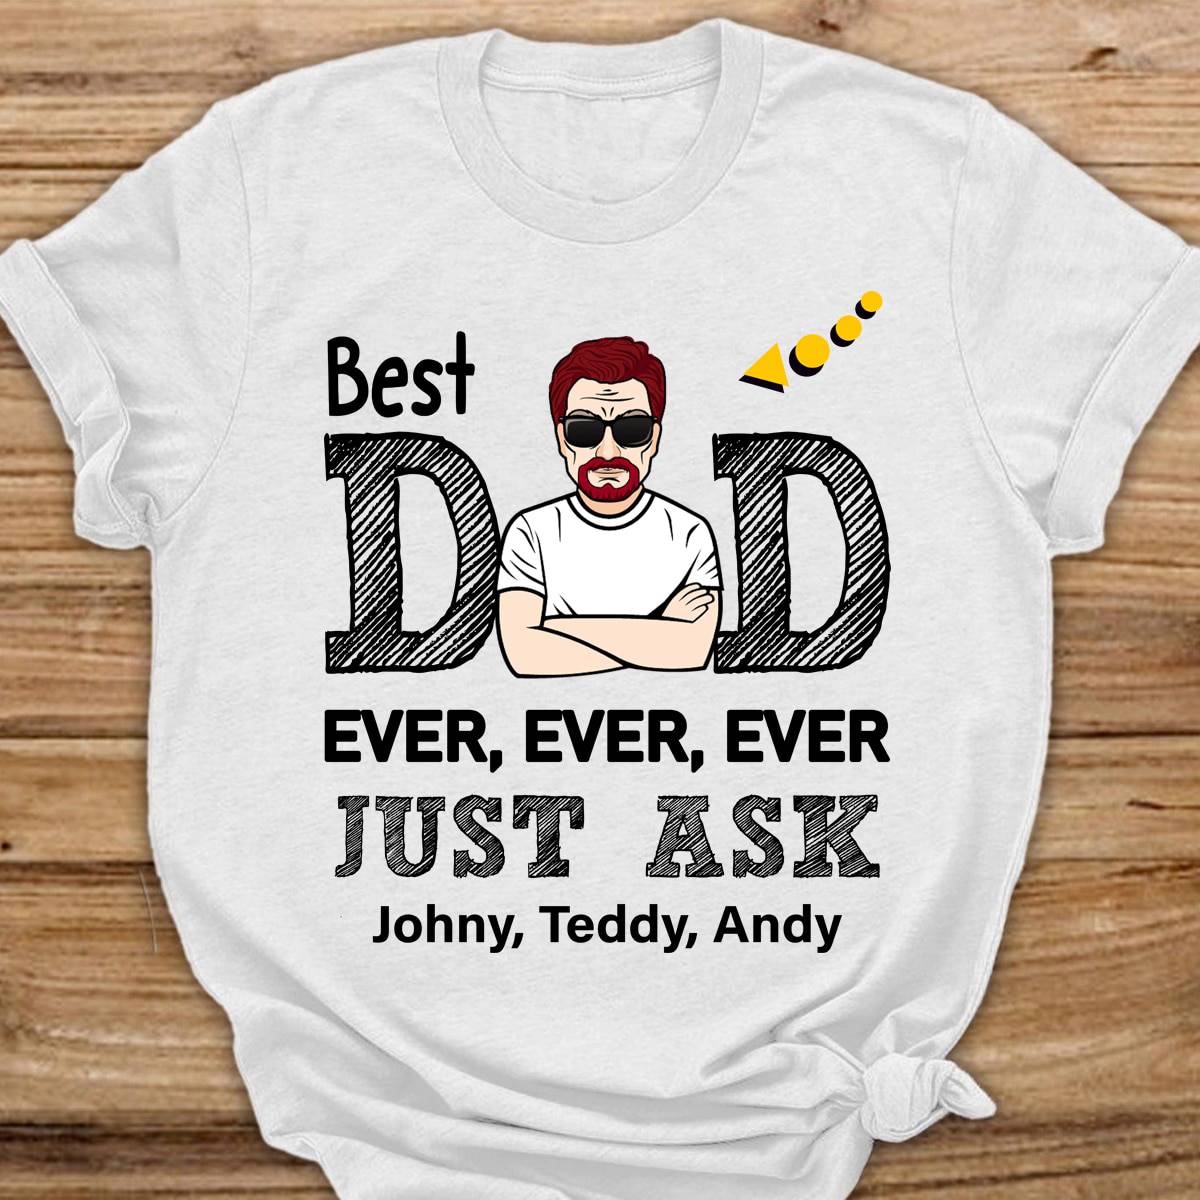 Illustration Print Father's day Gift Custom Gift Personalize Gift Personalized shirt My Dad Rocks Shirt Funny Shirt Best gift for Dad